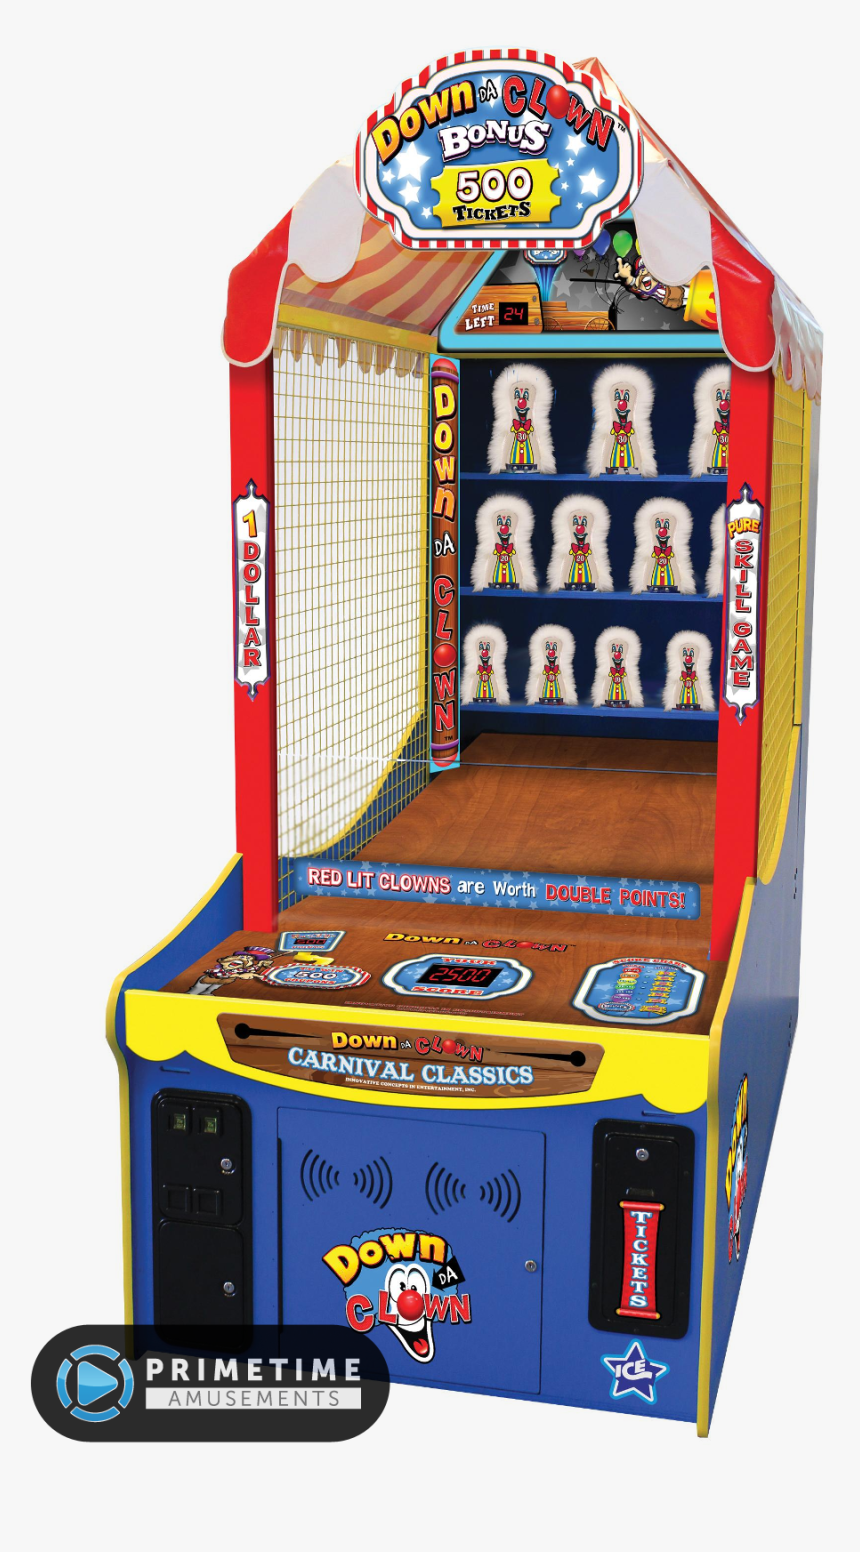 Down The Clown Redemption Arcade Game - Down The Clown Arcade Game, HD Png Download, Free Download